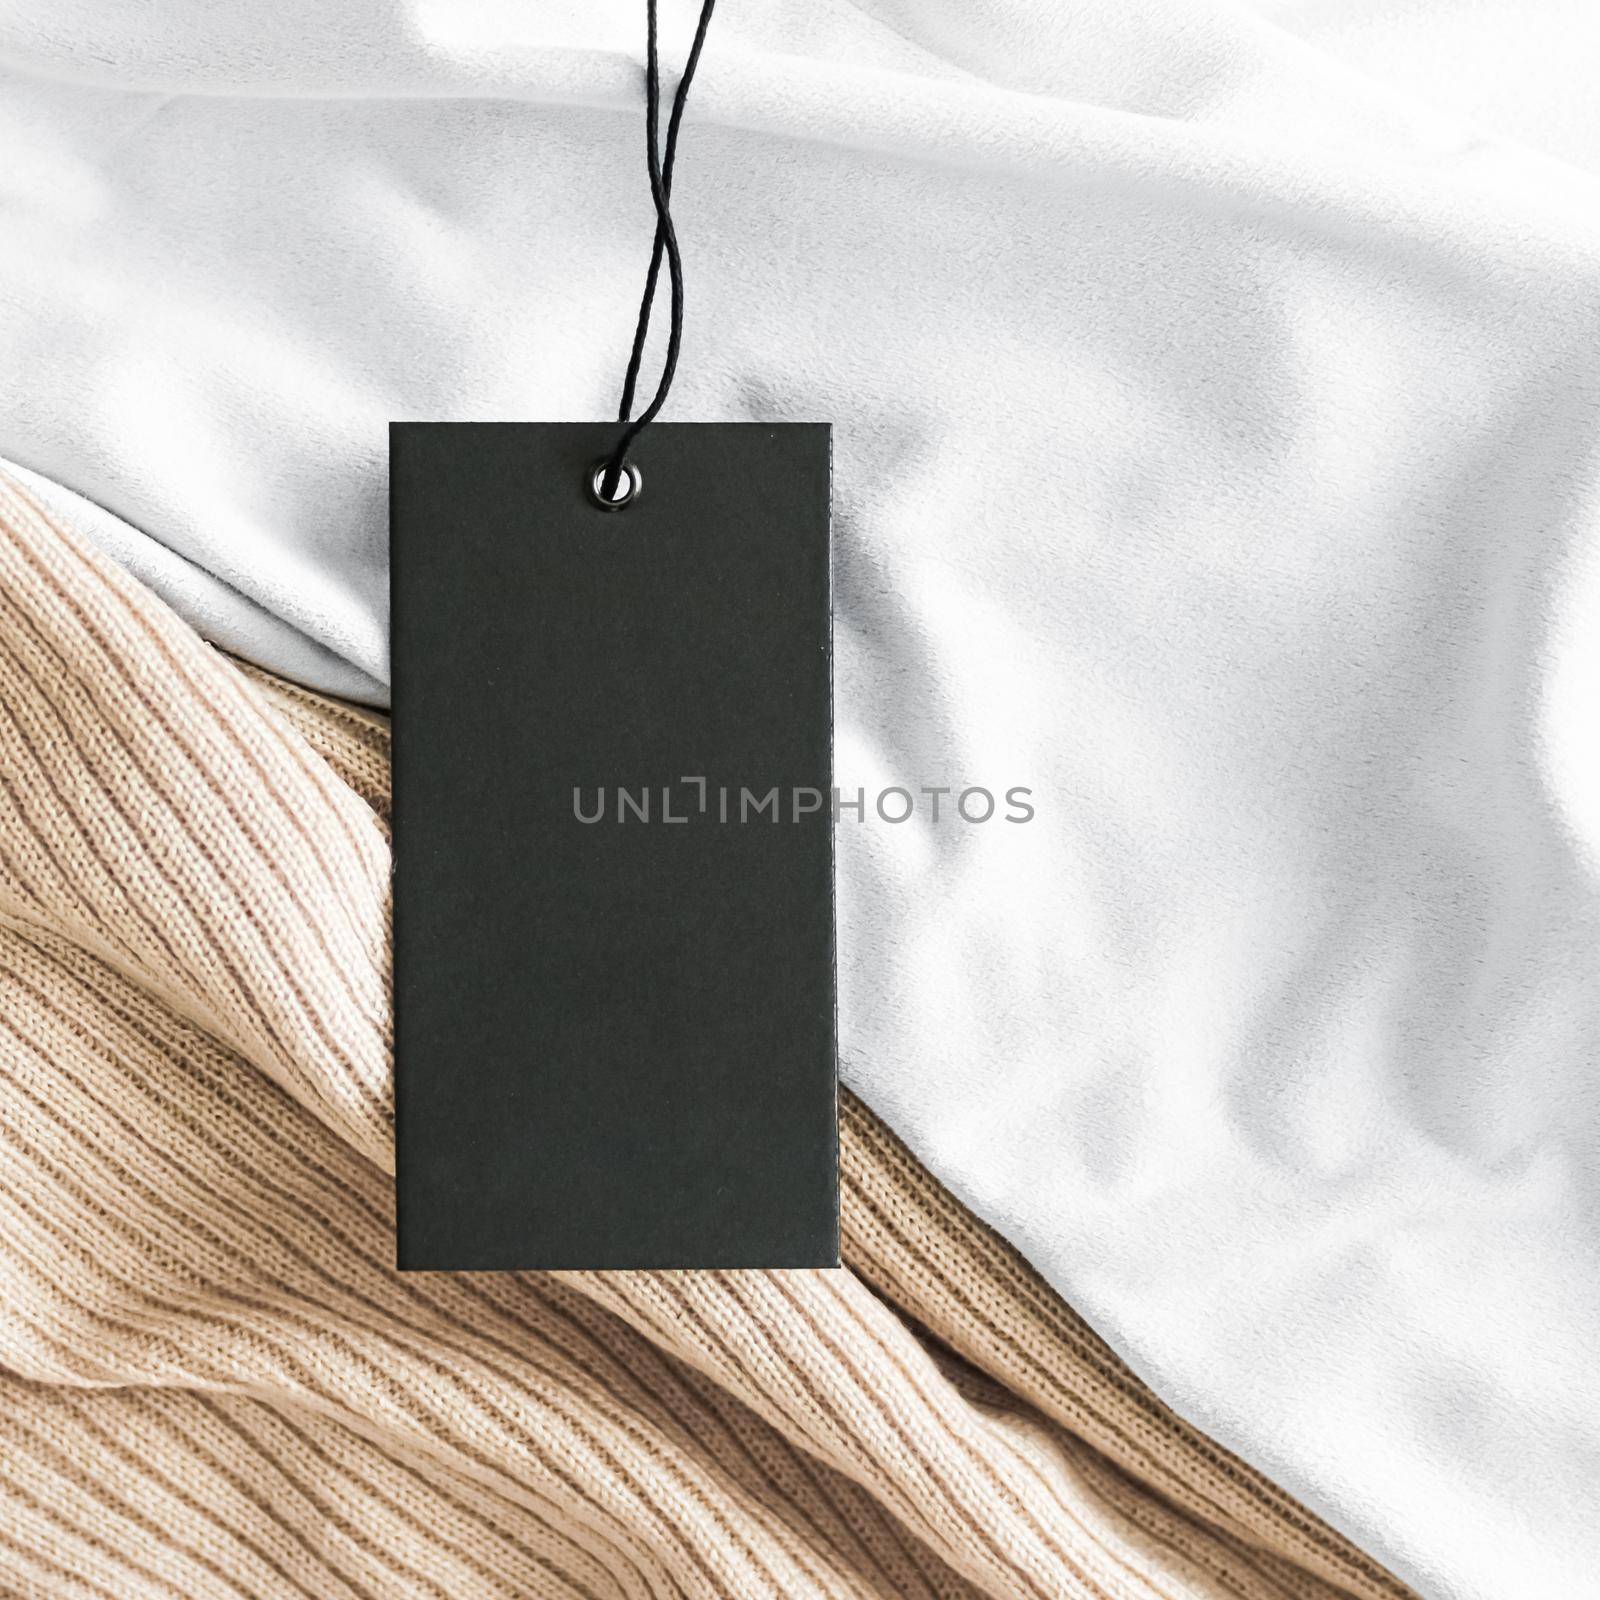 Clothing tag on luxury organic fabric background, sustainable fashion and brand label concept.